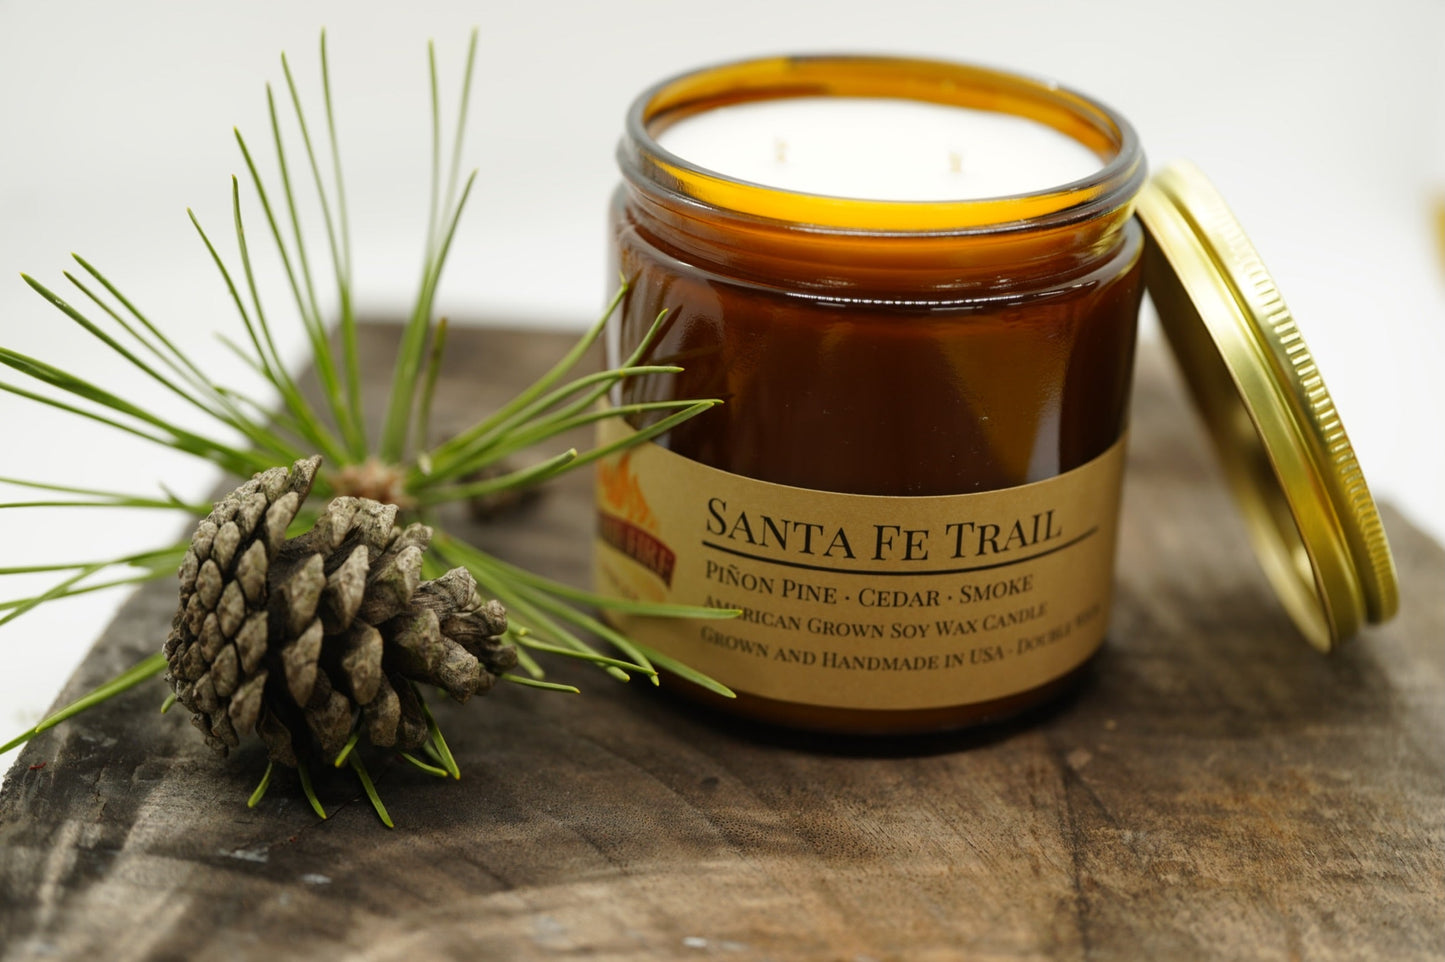 Santa Fe Trail Soy Candle | 16 oz Double Wick Amber Apothecary Jar